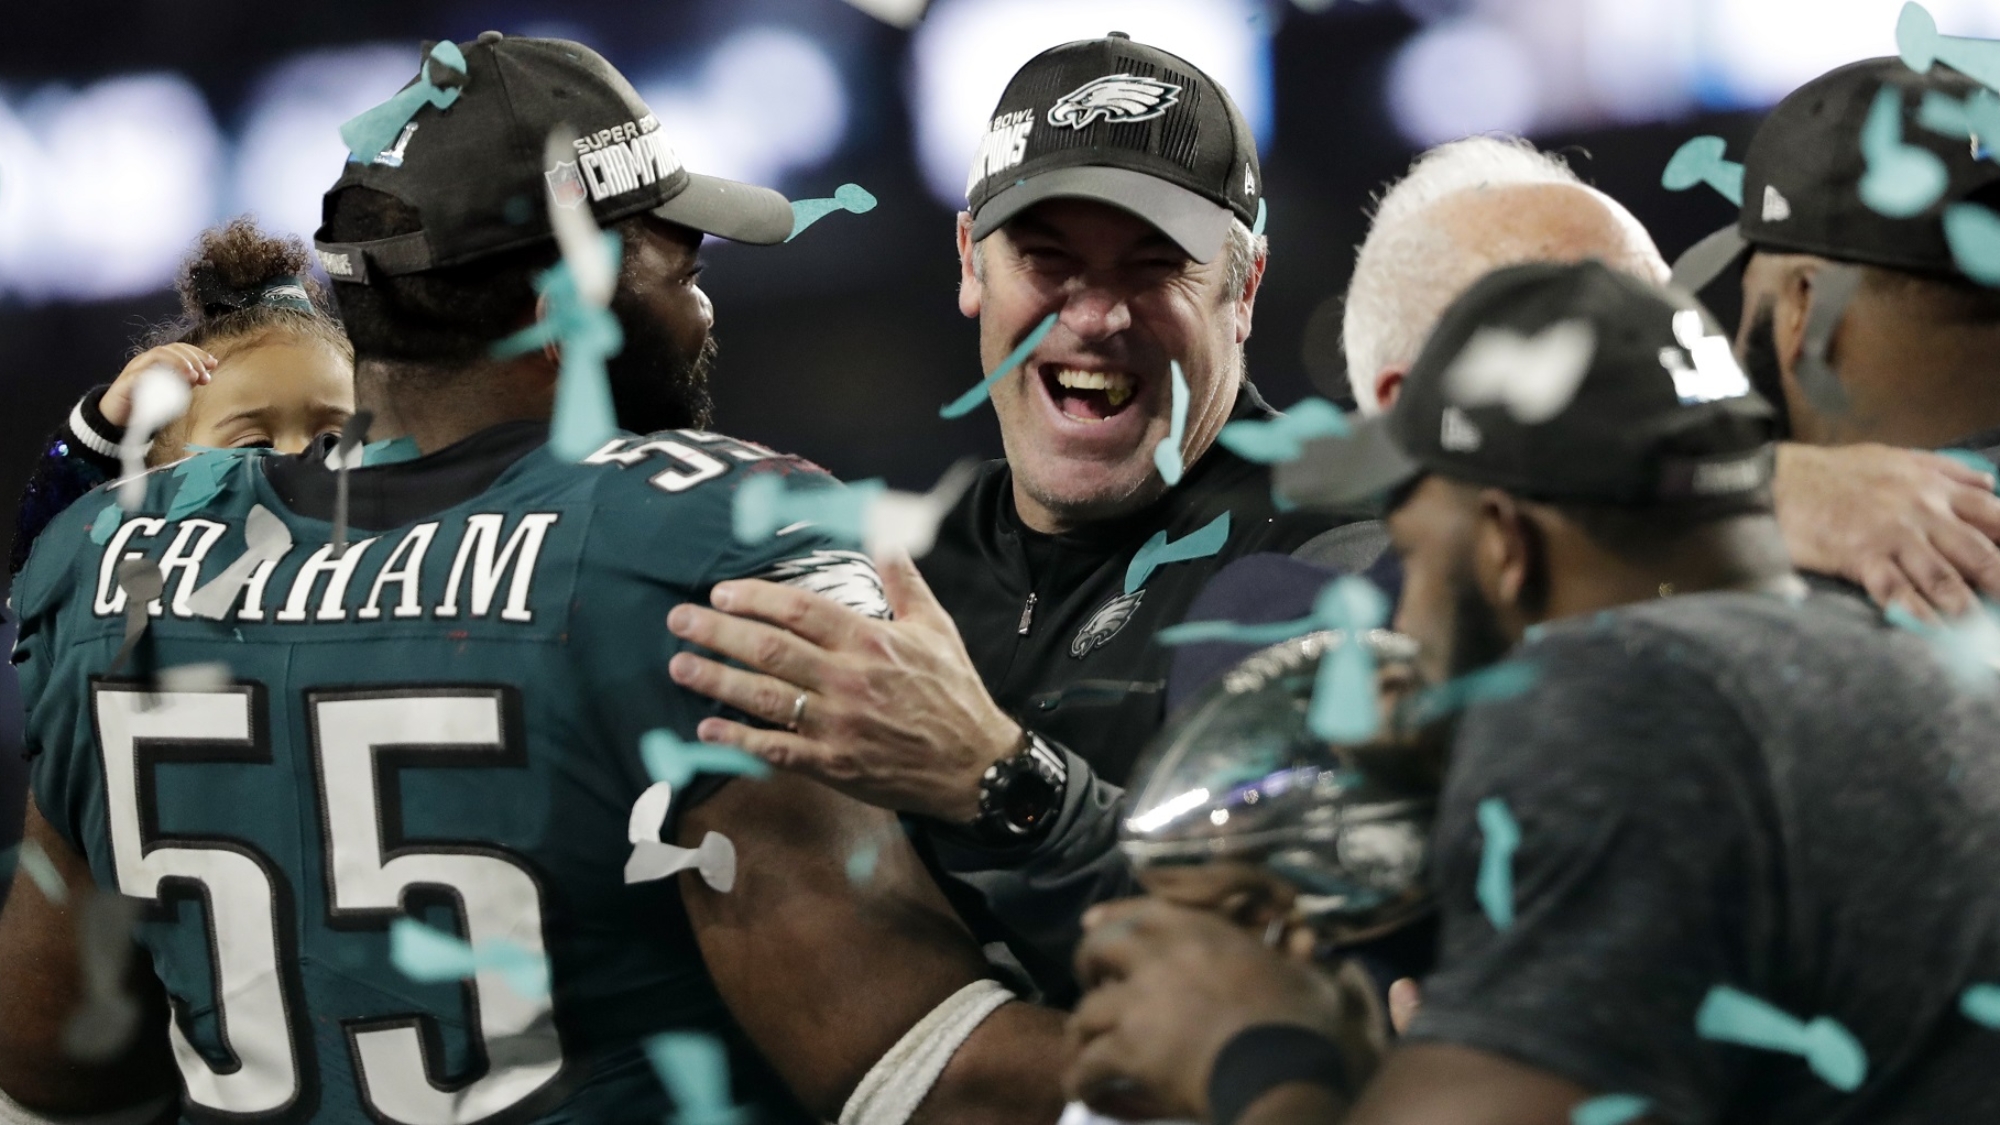 Philadelphia Eagles head coach Doug Pederson celebrates with defensive end Brandon Graham (55) and other players after winning the NFL Super Bowl 52 football game against the New England Patriots, Sunday, Feb. 4, 2018, in Minneapolis. The Eagles won 41-33. (AP Photo/Tony Gutierrez)